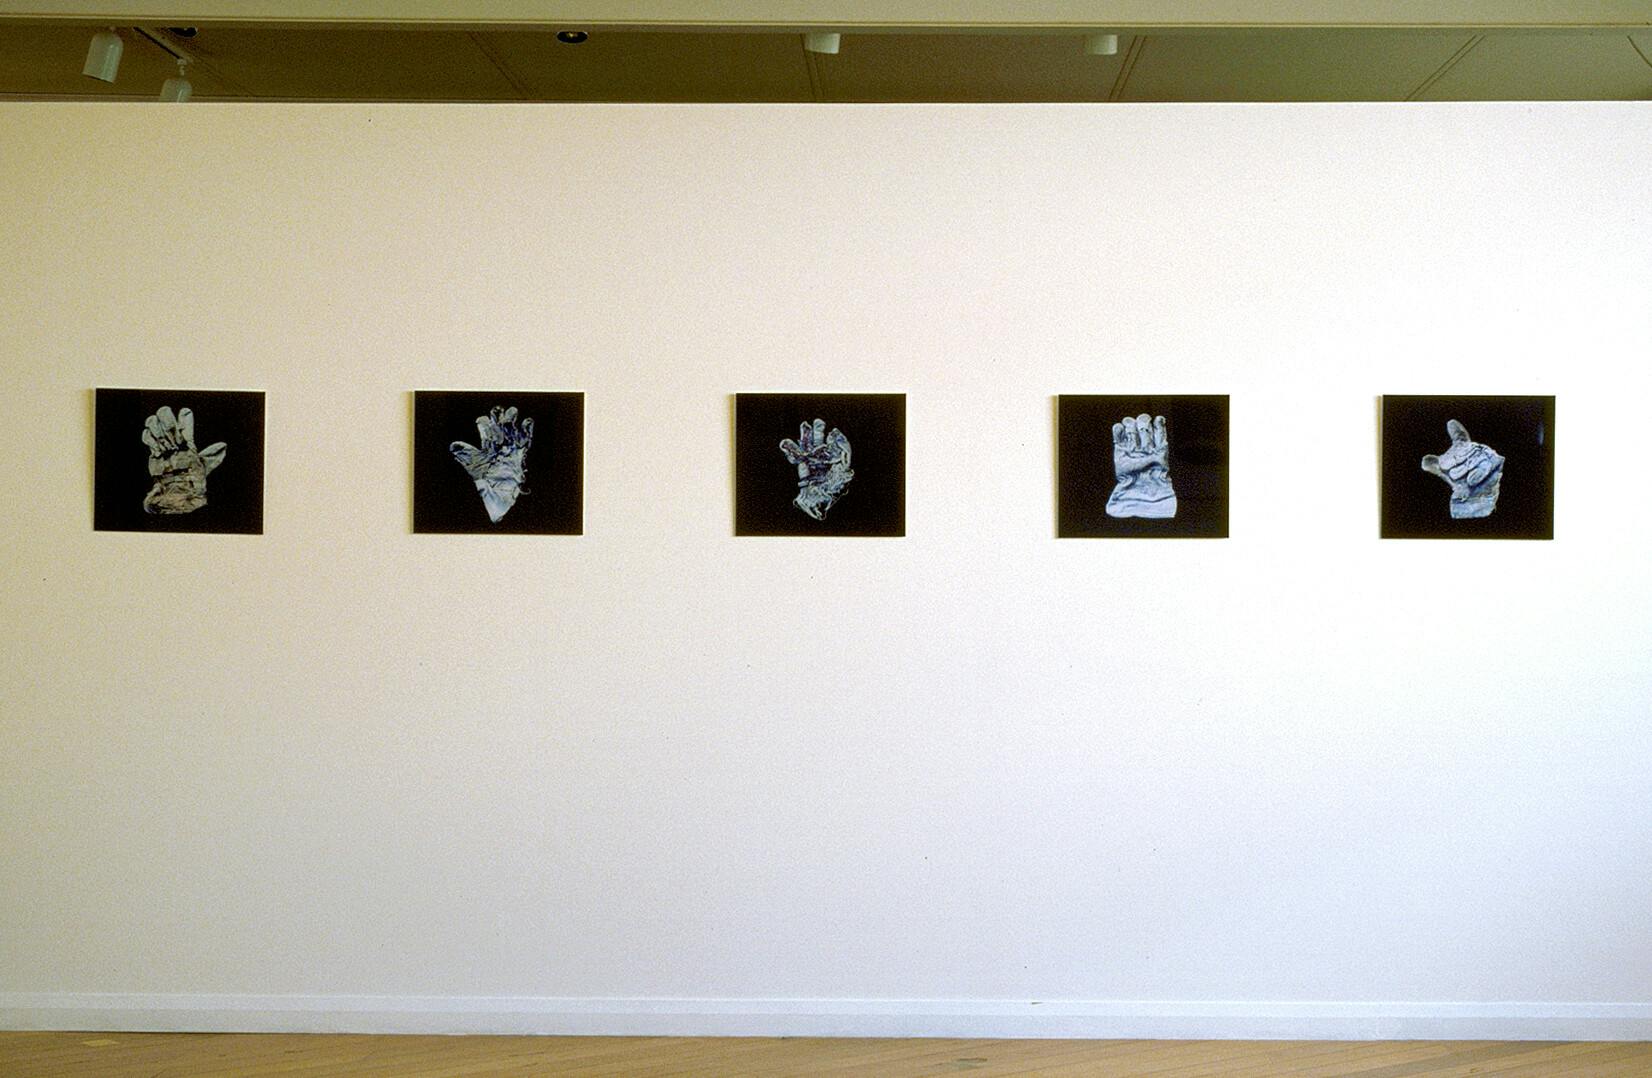 Installation view of Suicide of the Hands series